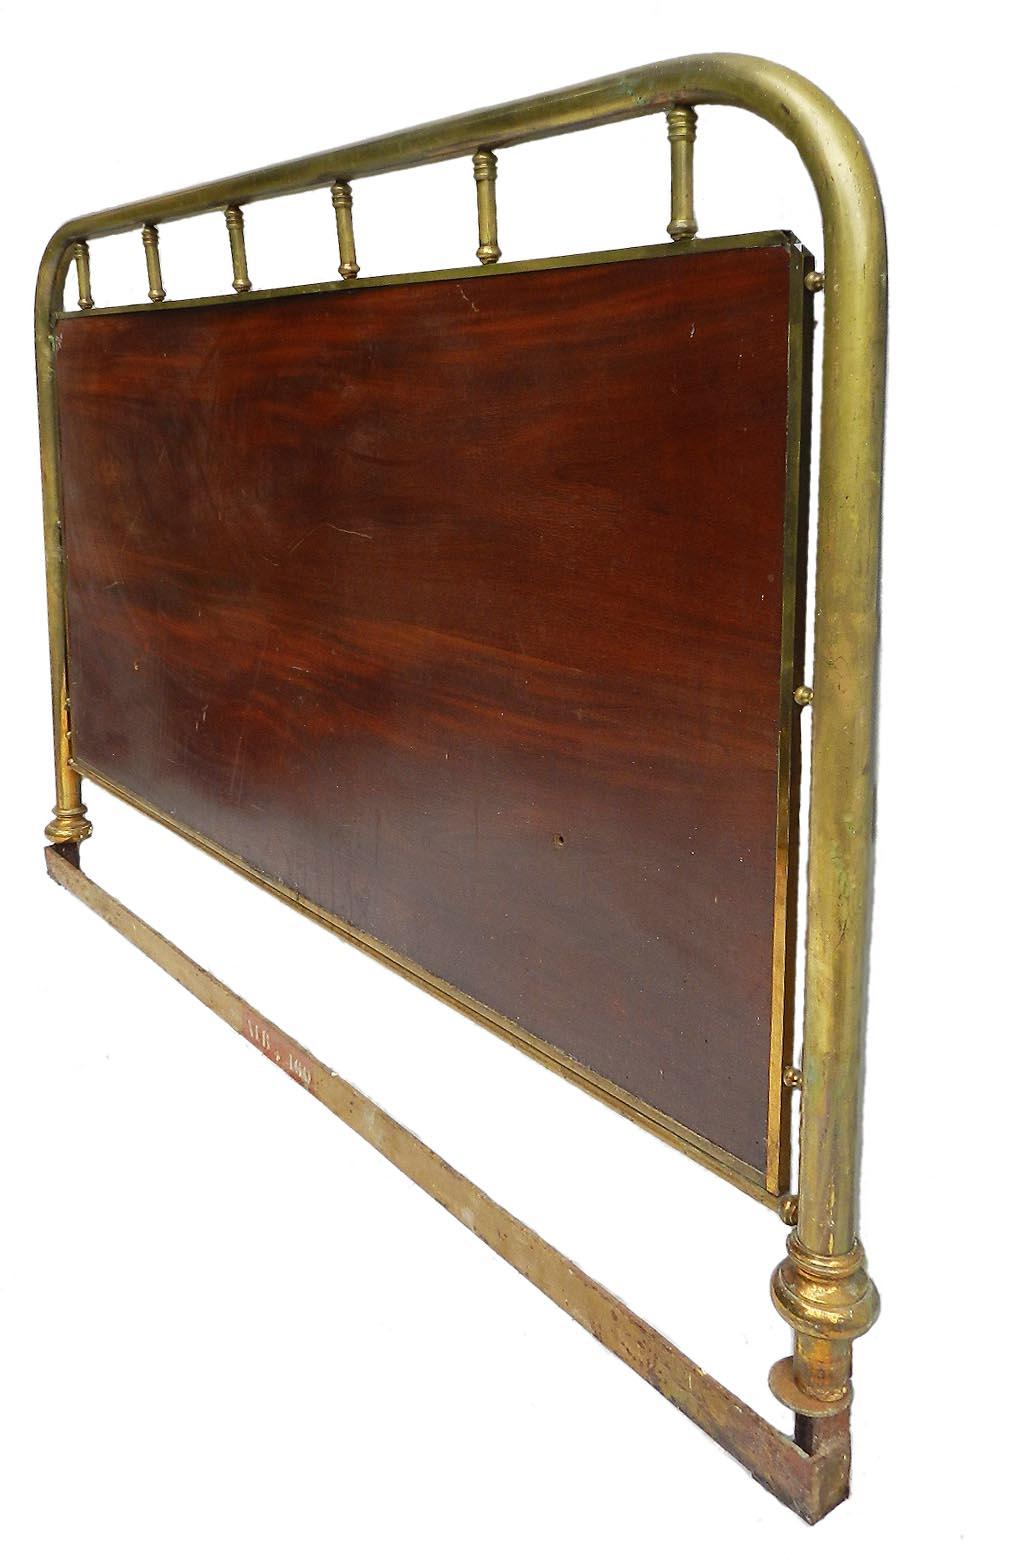 French bed headboard brass wood US queen UK king size, circa 1900
Easy to customize the wood panel with paint, stain or upholstery
From a Parisian hotel that is being refurbished
Good quality, solid and heavy
The brass has a patina due to time